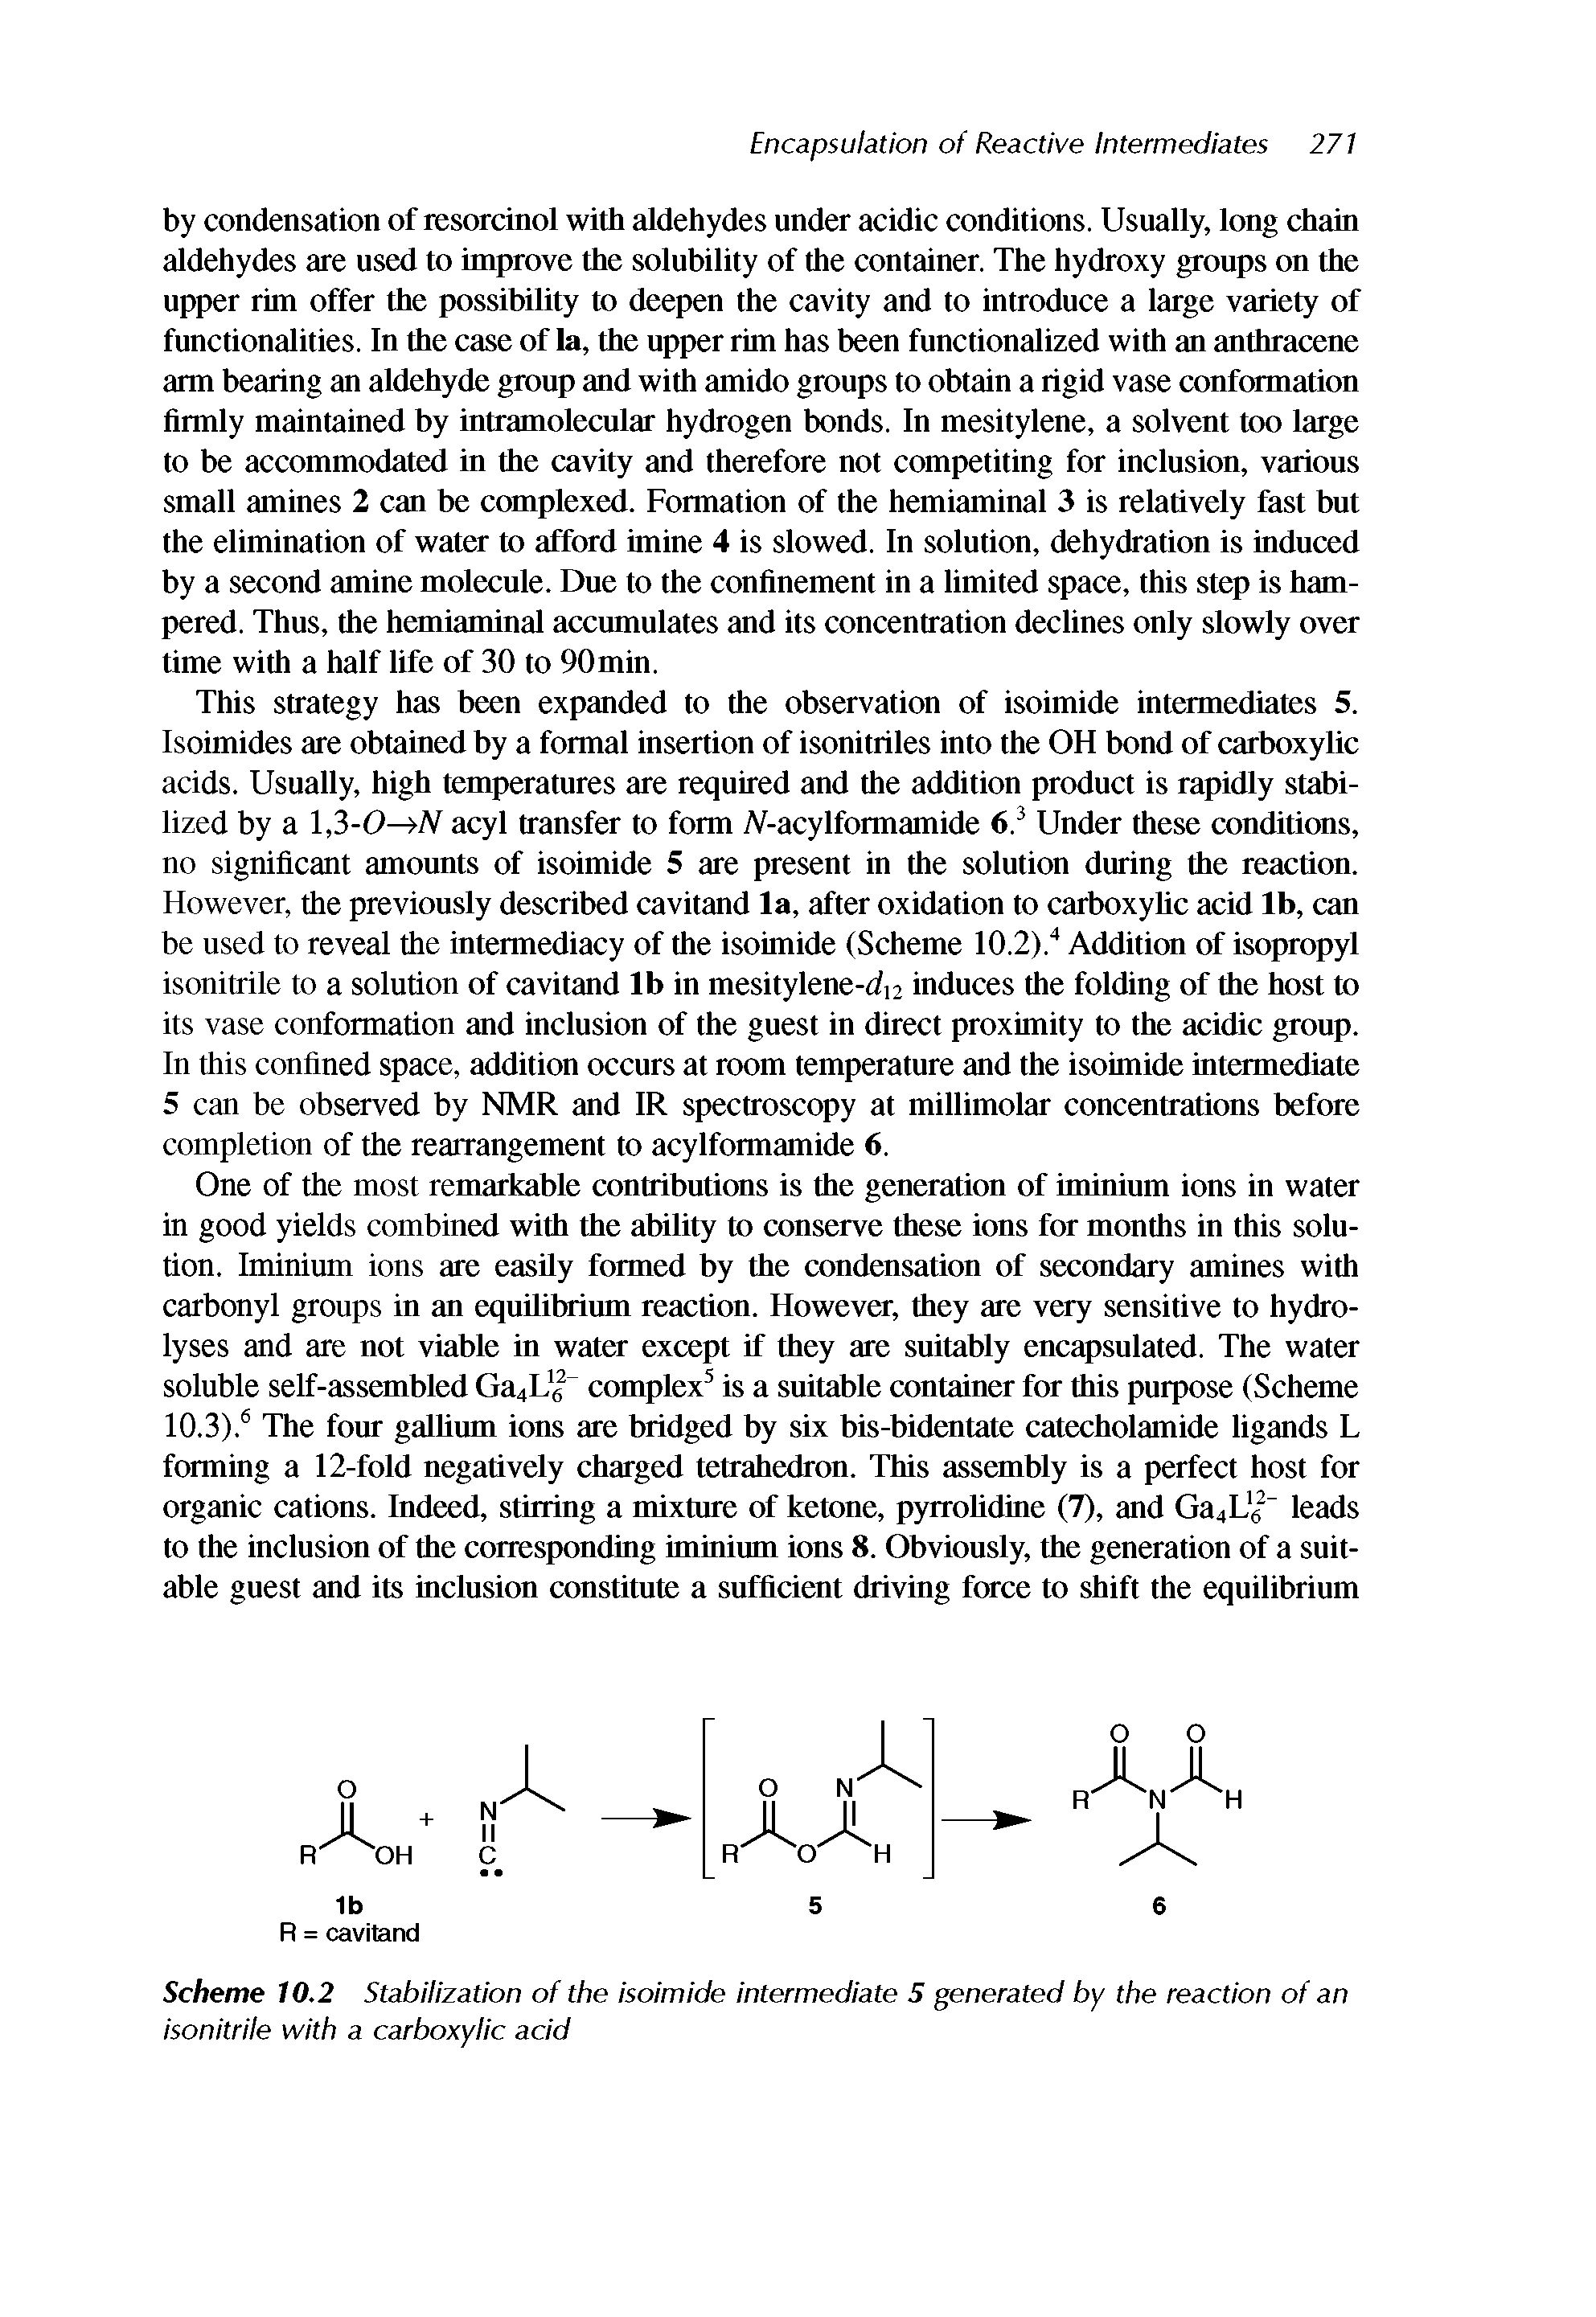 Scheme 10.2 Stabilization of the isoimide intermediate 5 generated by the reaction of an isonitrile with a carboxylic acid...